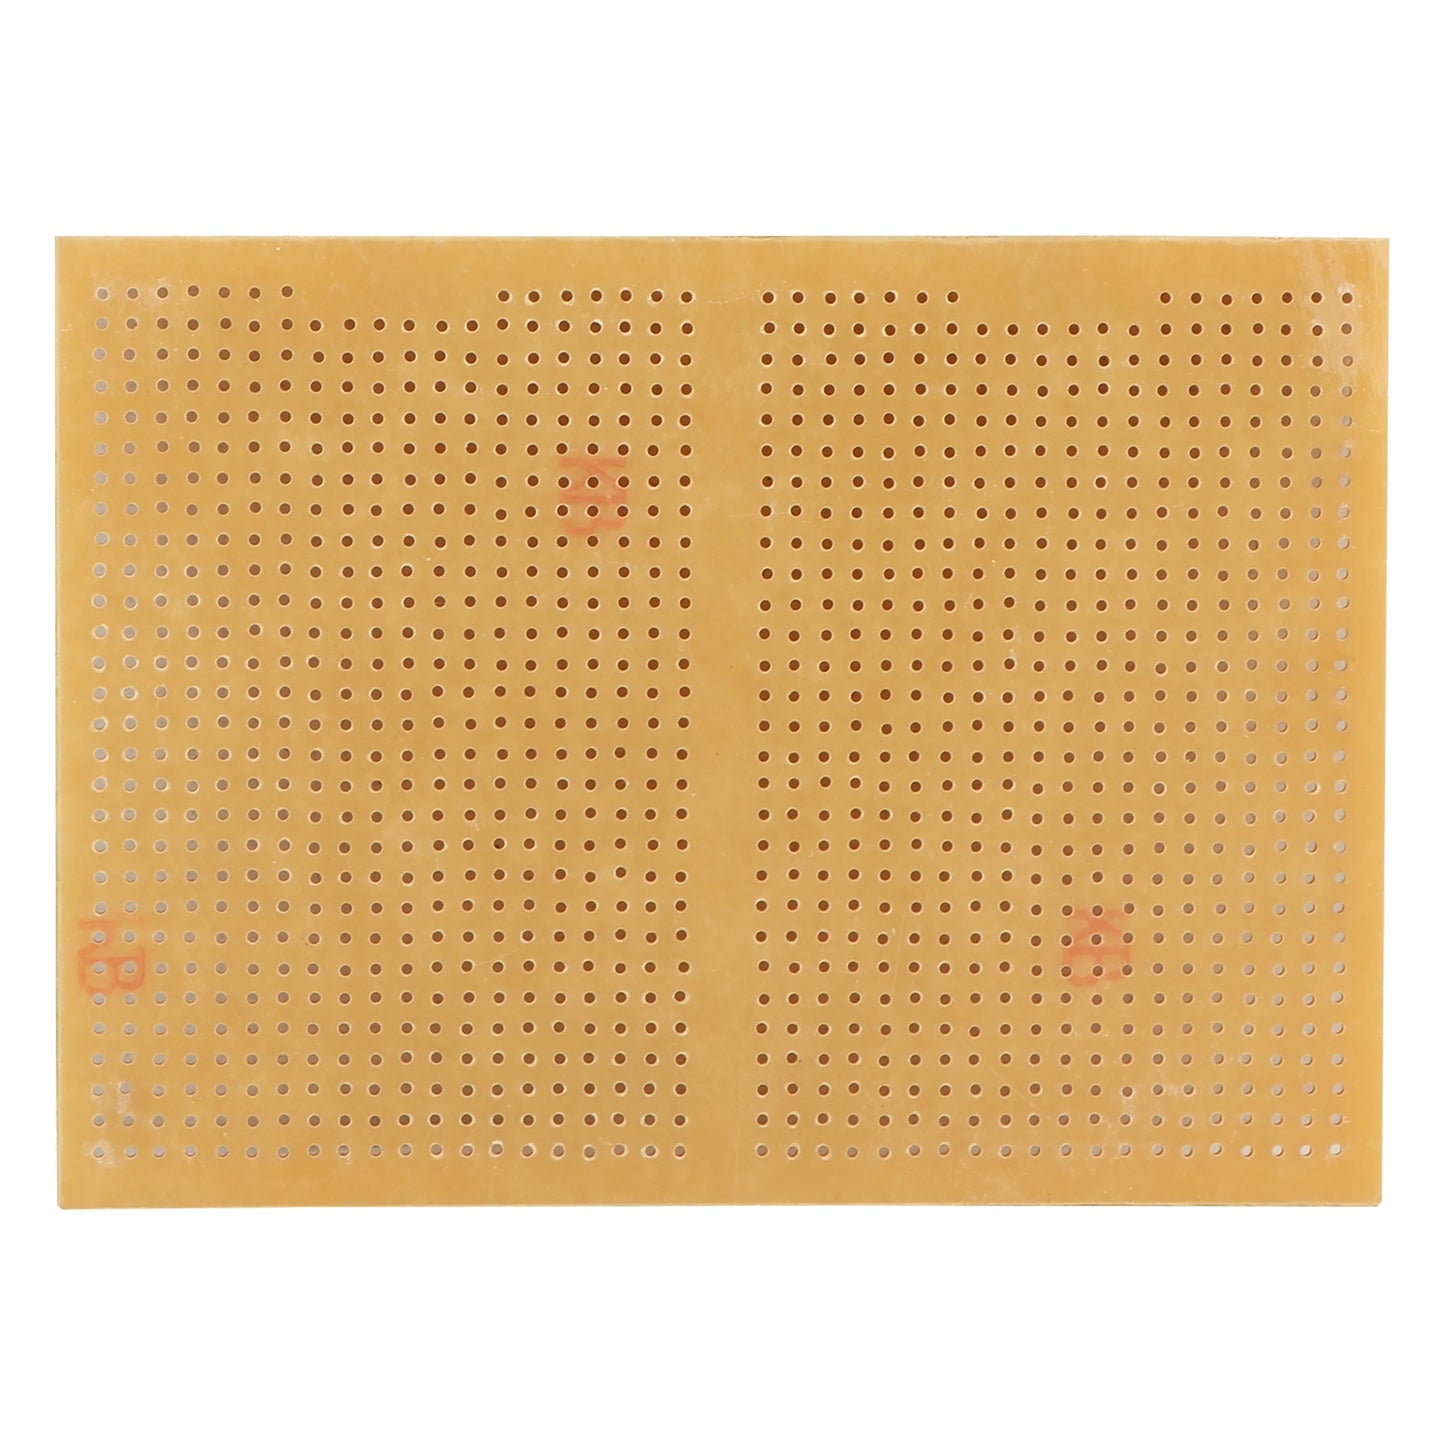 General Purpose PCB Breadboard - FR2 (Set of 10) 110mm x 80mm - with holes